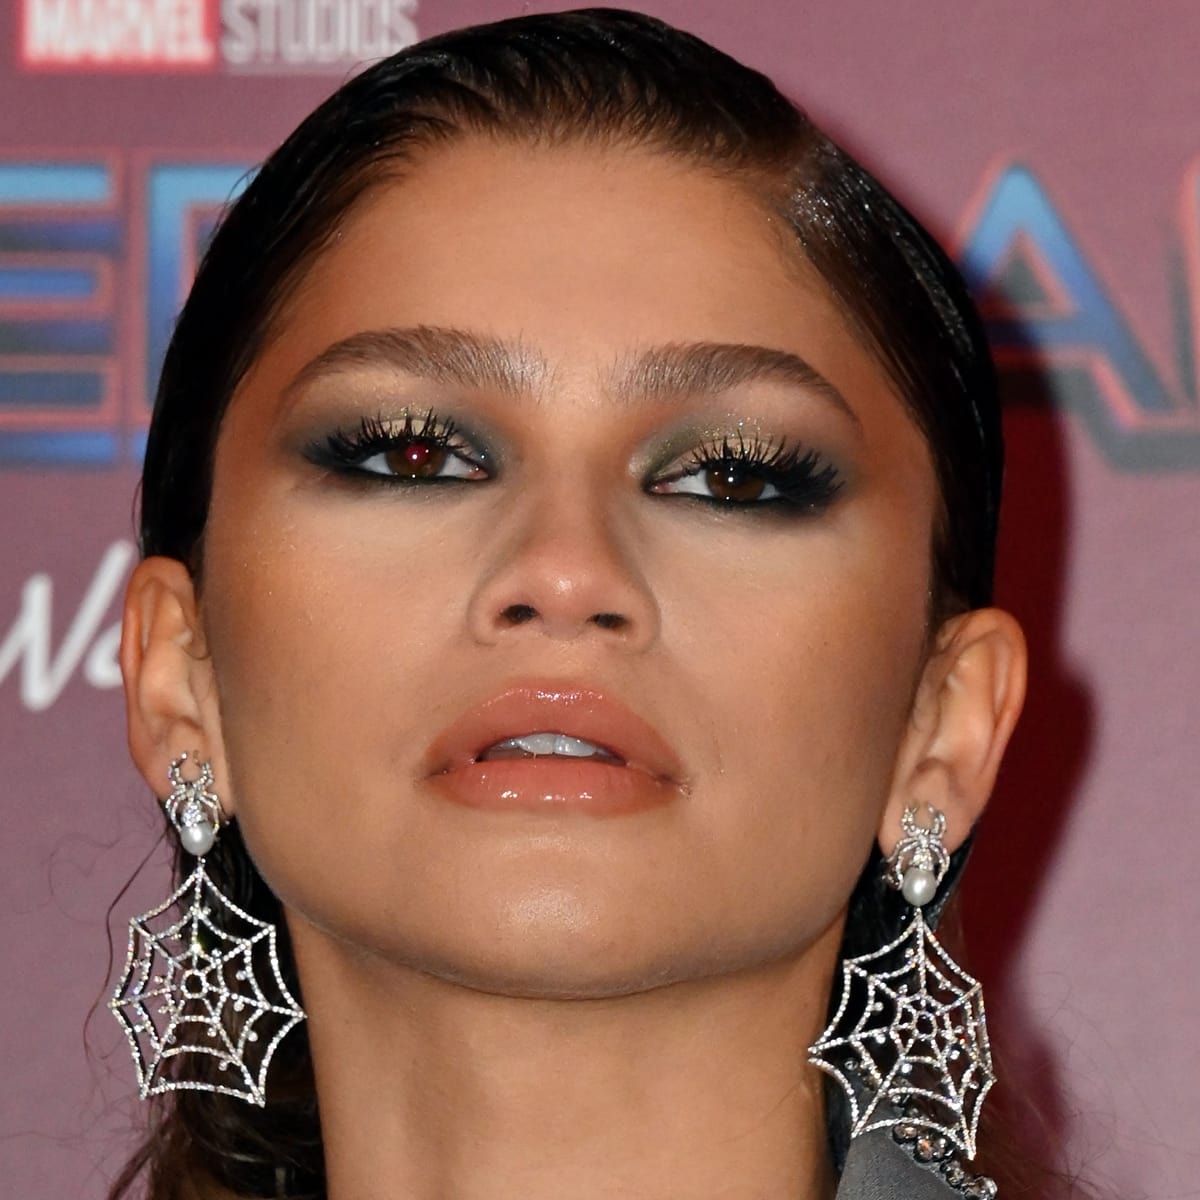 Zendaya's spiderweb earrings by Jacob & Co. feature two white pearl-and-diamond spiders